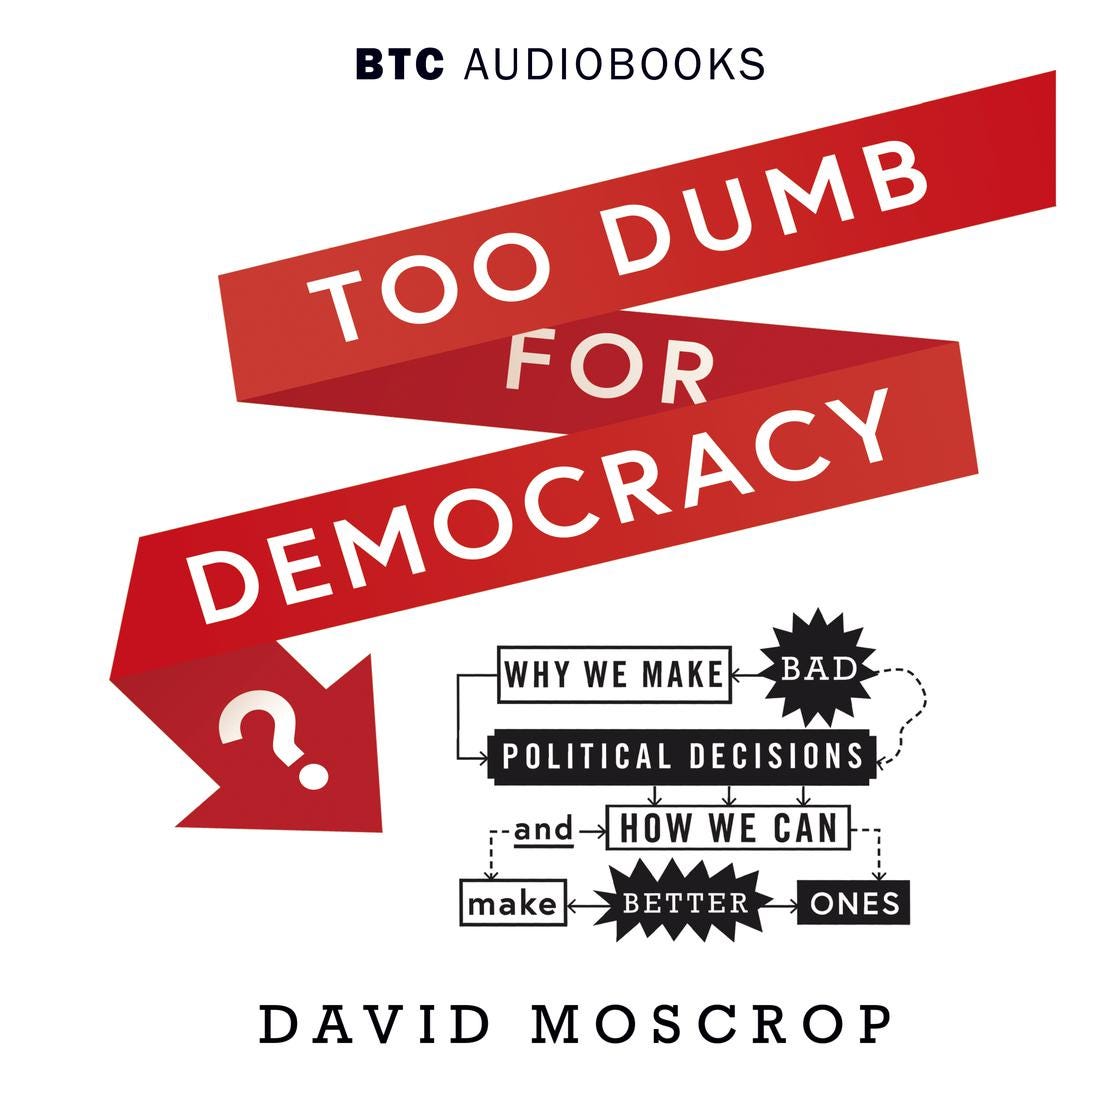 The audiobook cover of Too Dumb for Democracy by BTC Audiobooks, authored by David Moscrop. 